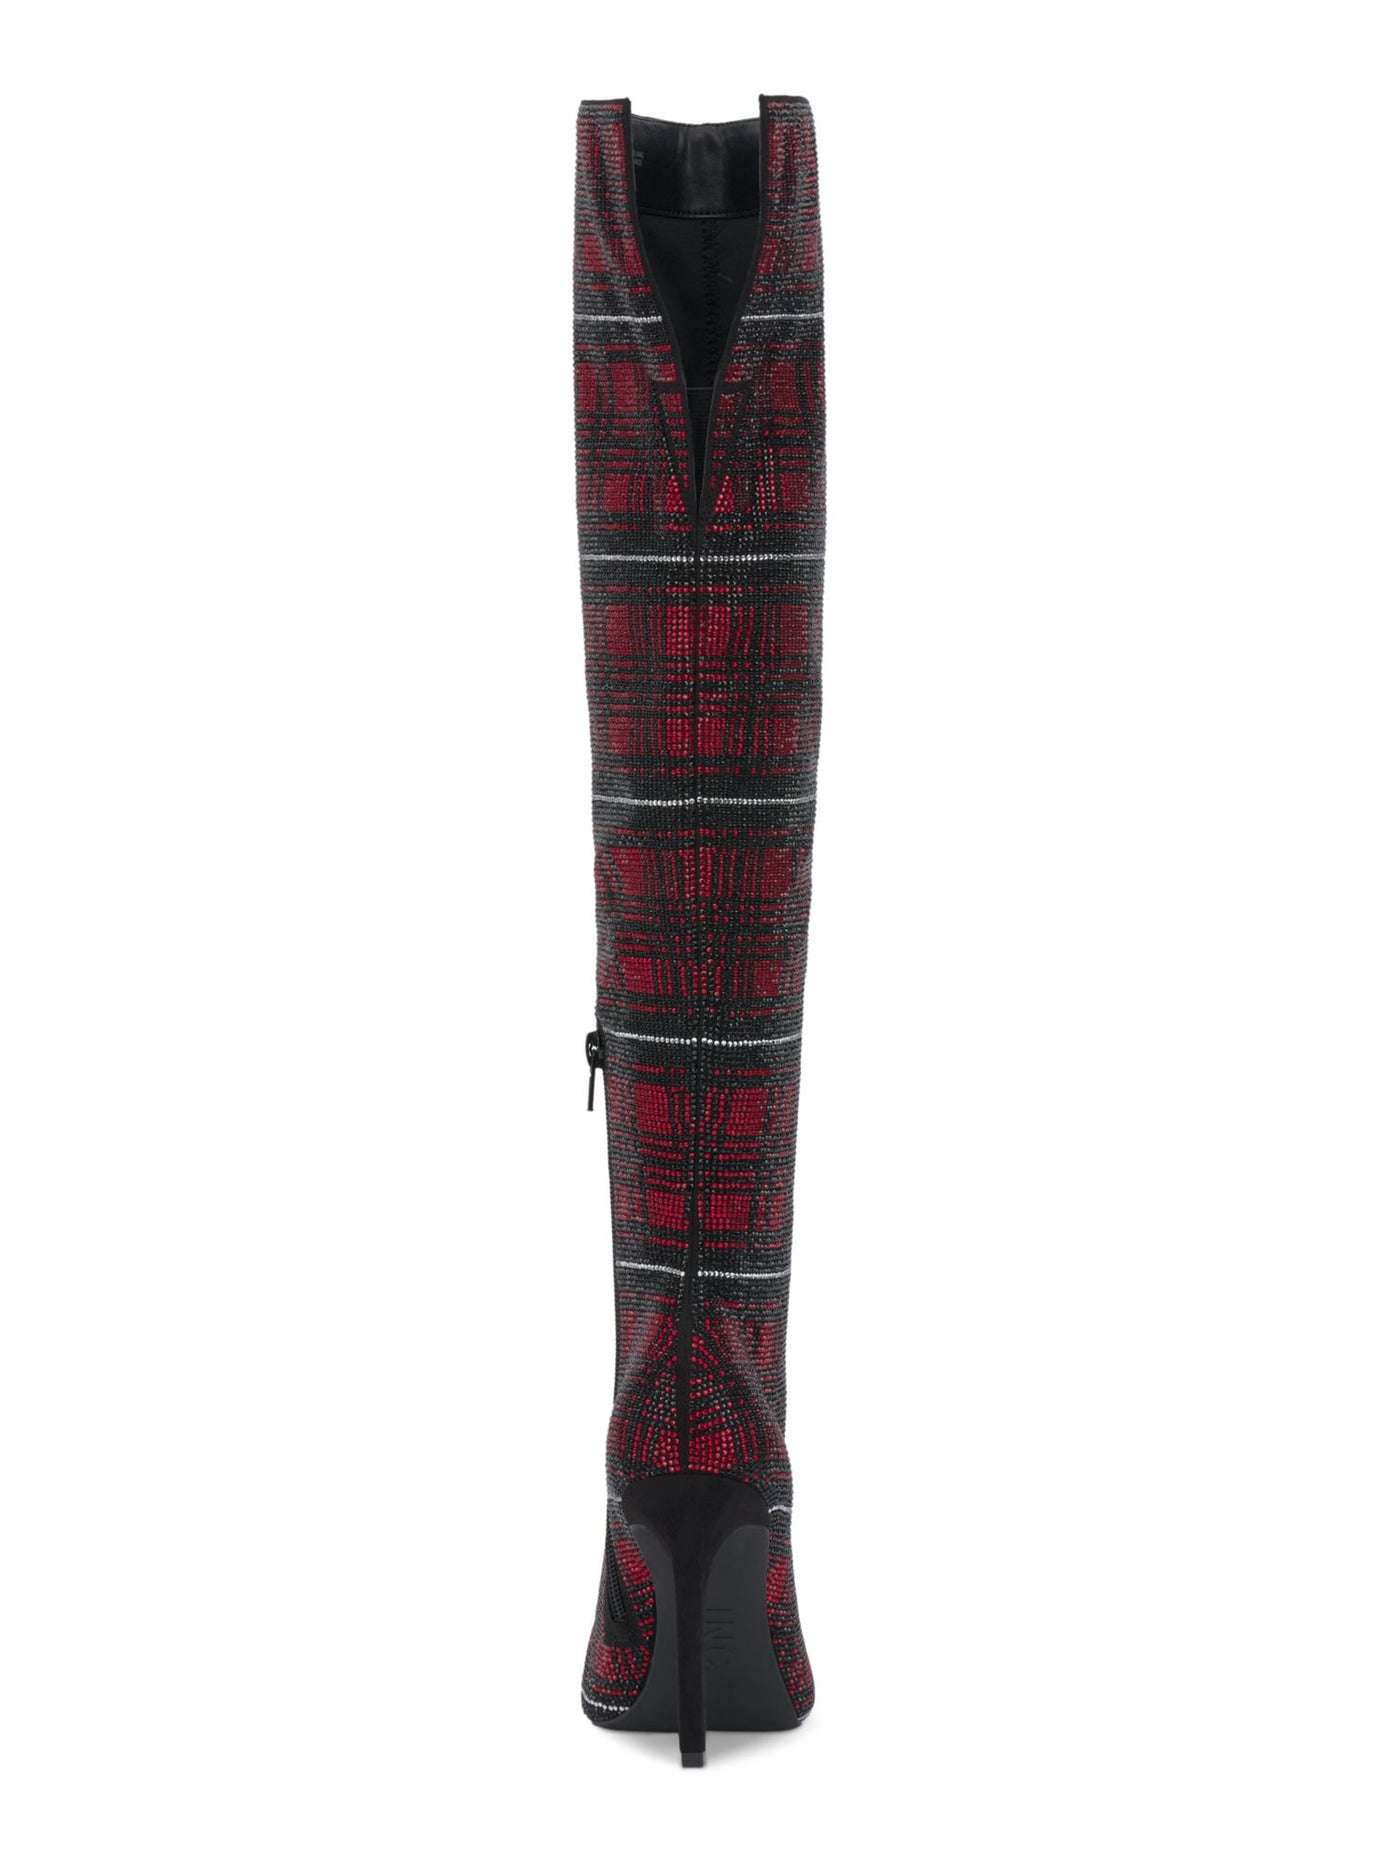 INC Womens Red Plaid Vented Back Padded Rhinestone Goring Saveria Pointed Toe Stiletto Zip-Up Dress Boots 7.5 M